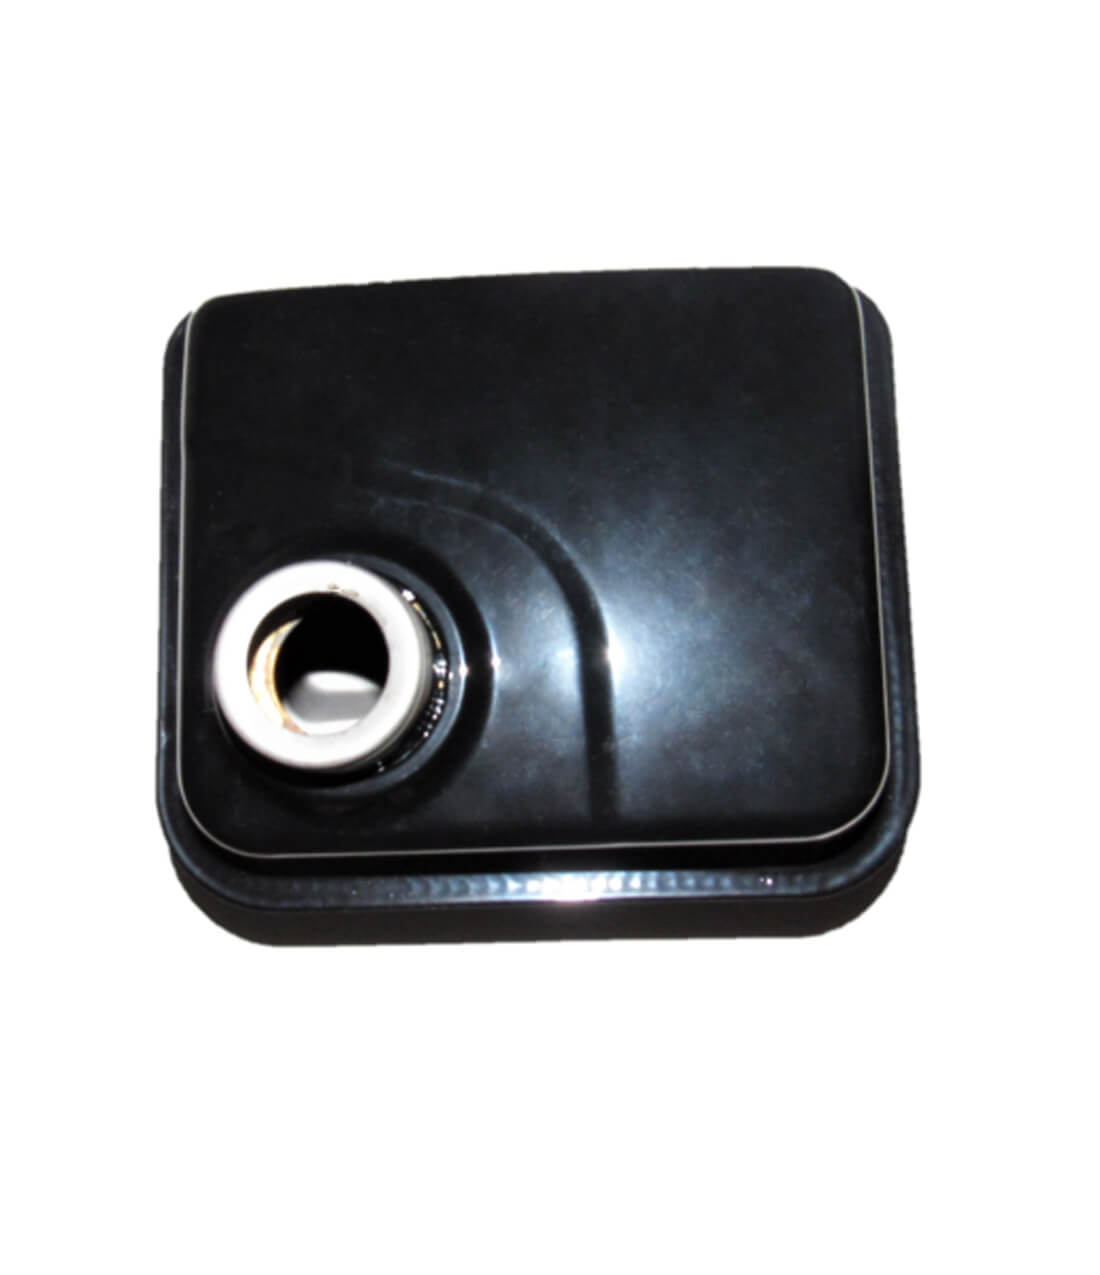 Fuel Tank Fits Coleman CT100, Motovox, + other small Mini Bikes - Click Image to Close